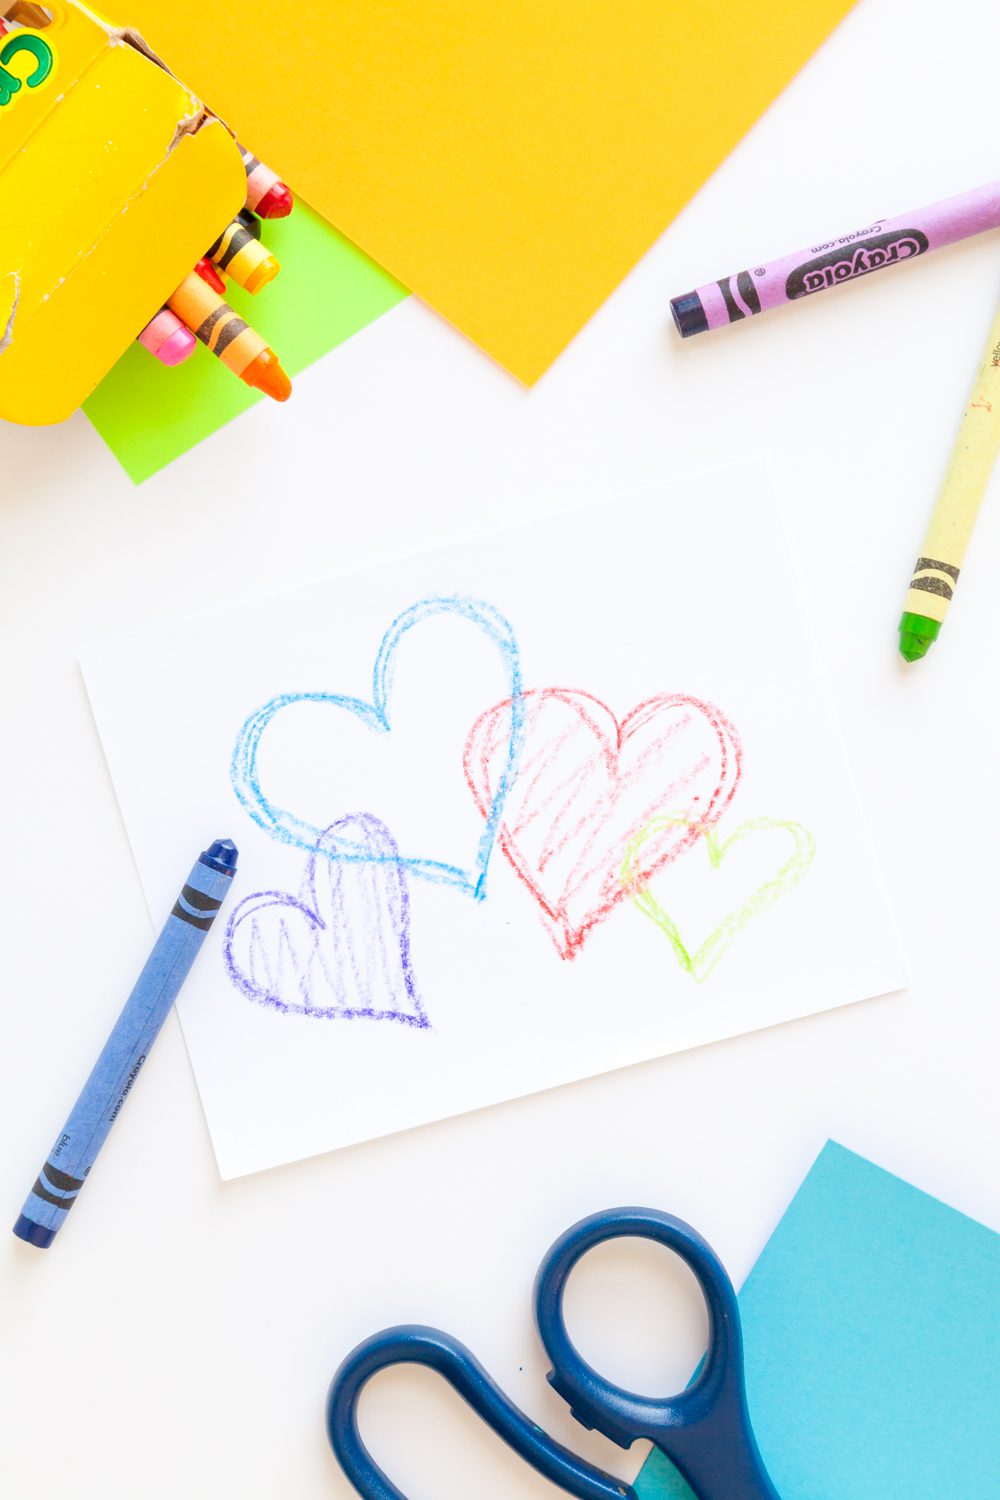 A card with colored hearts, surrounded by blue and yellow paper, and crayons.